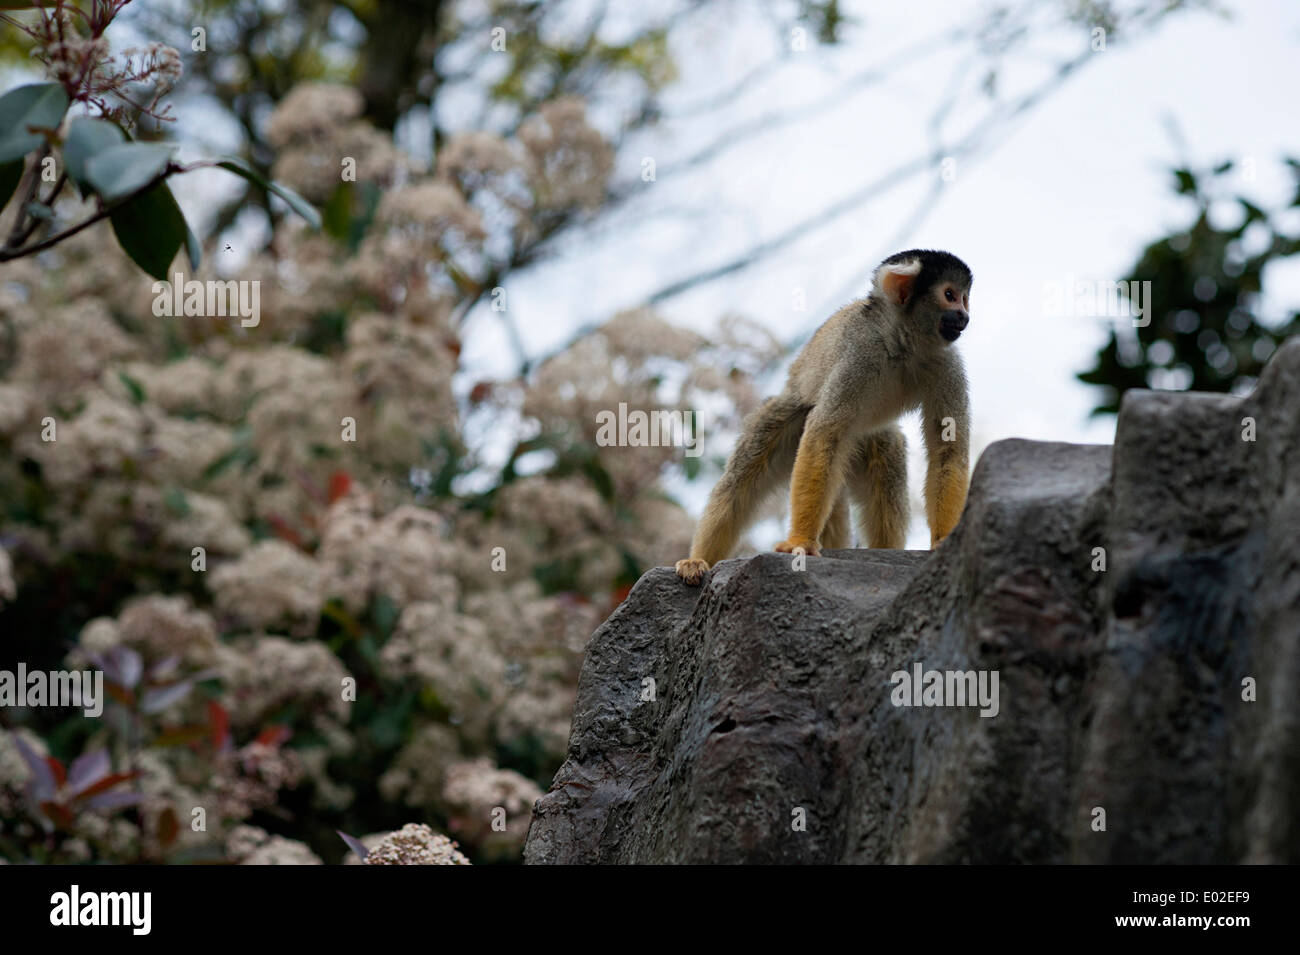 Black-capped squirrel monkey enjoys home in natural habitat forest enclosure in London Zoo. Stock Photo